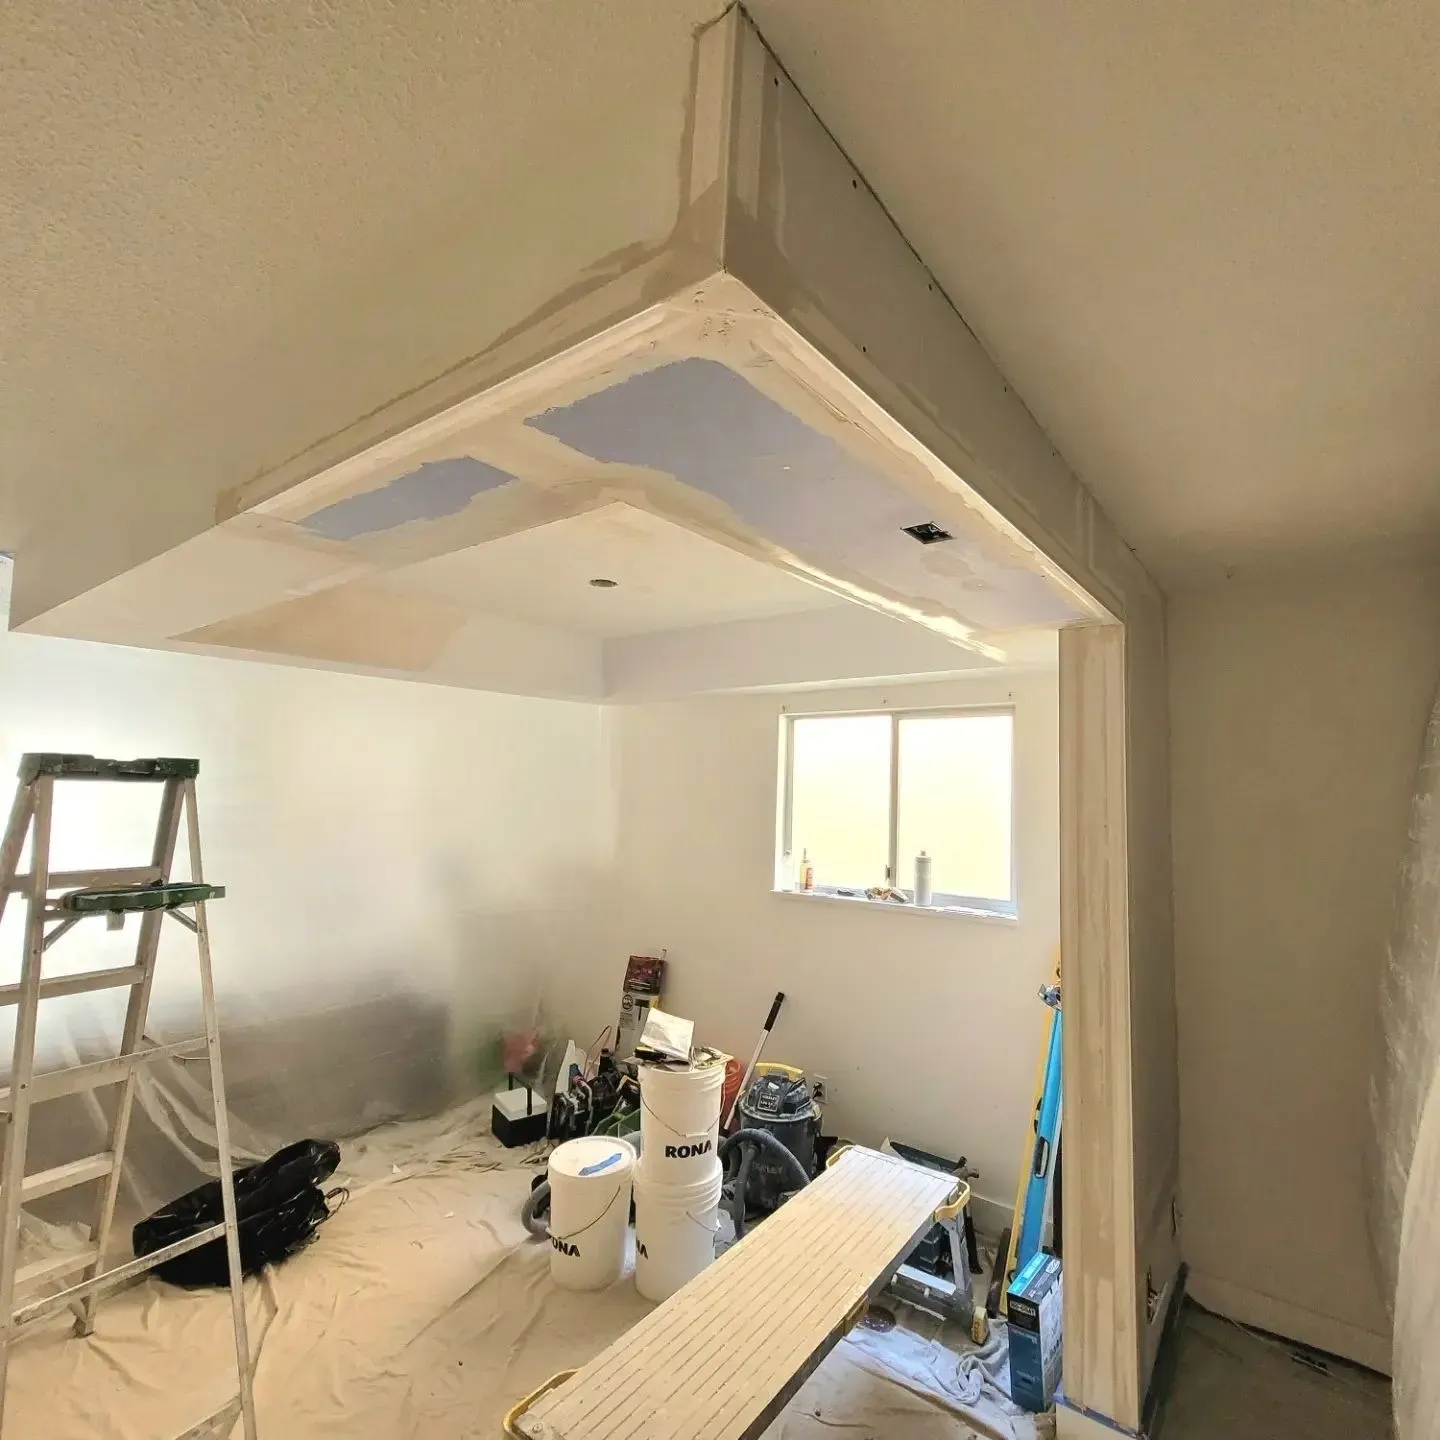 A room being remodeled with the ceiling up.